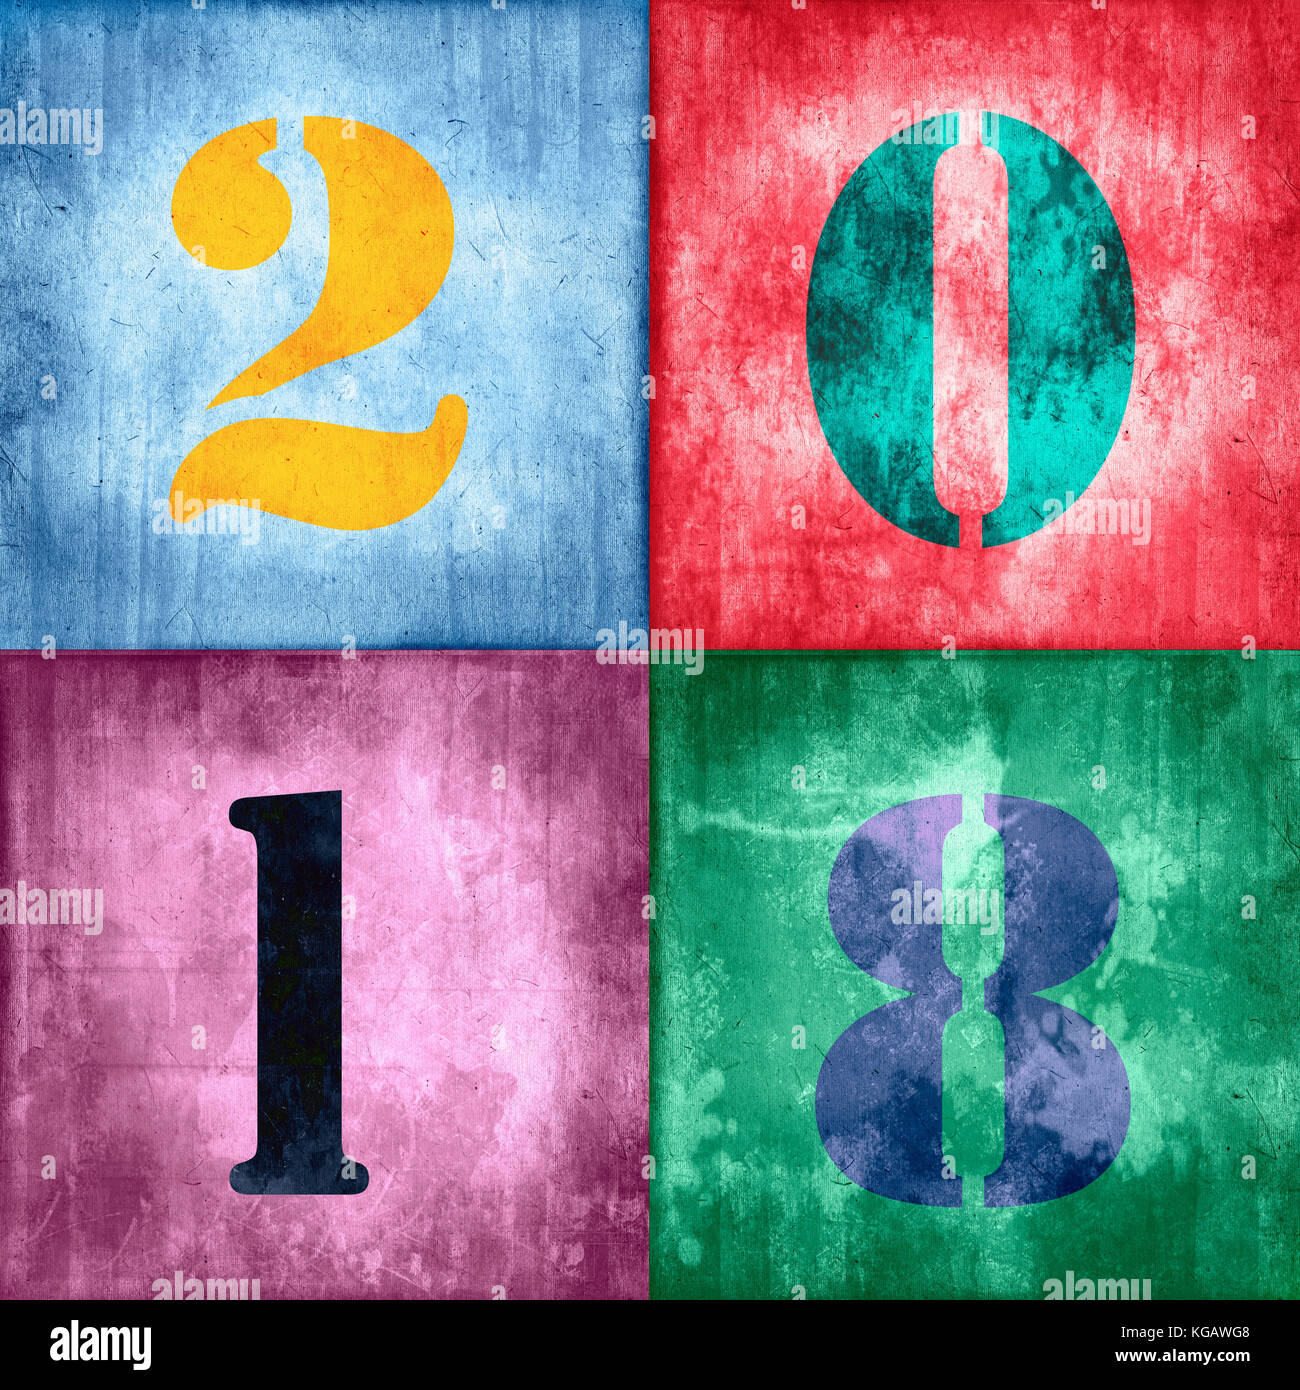 2018, vintage numbers on grunge textured colorful background Stock Photo